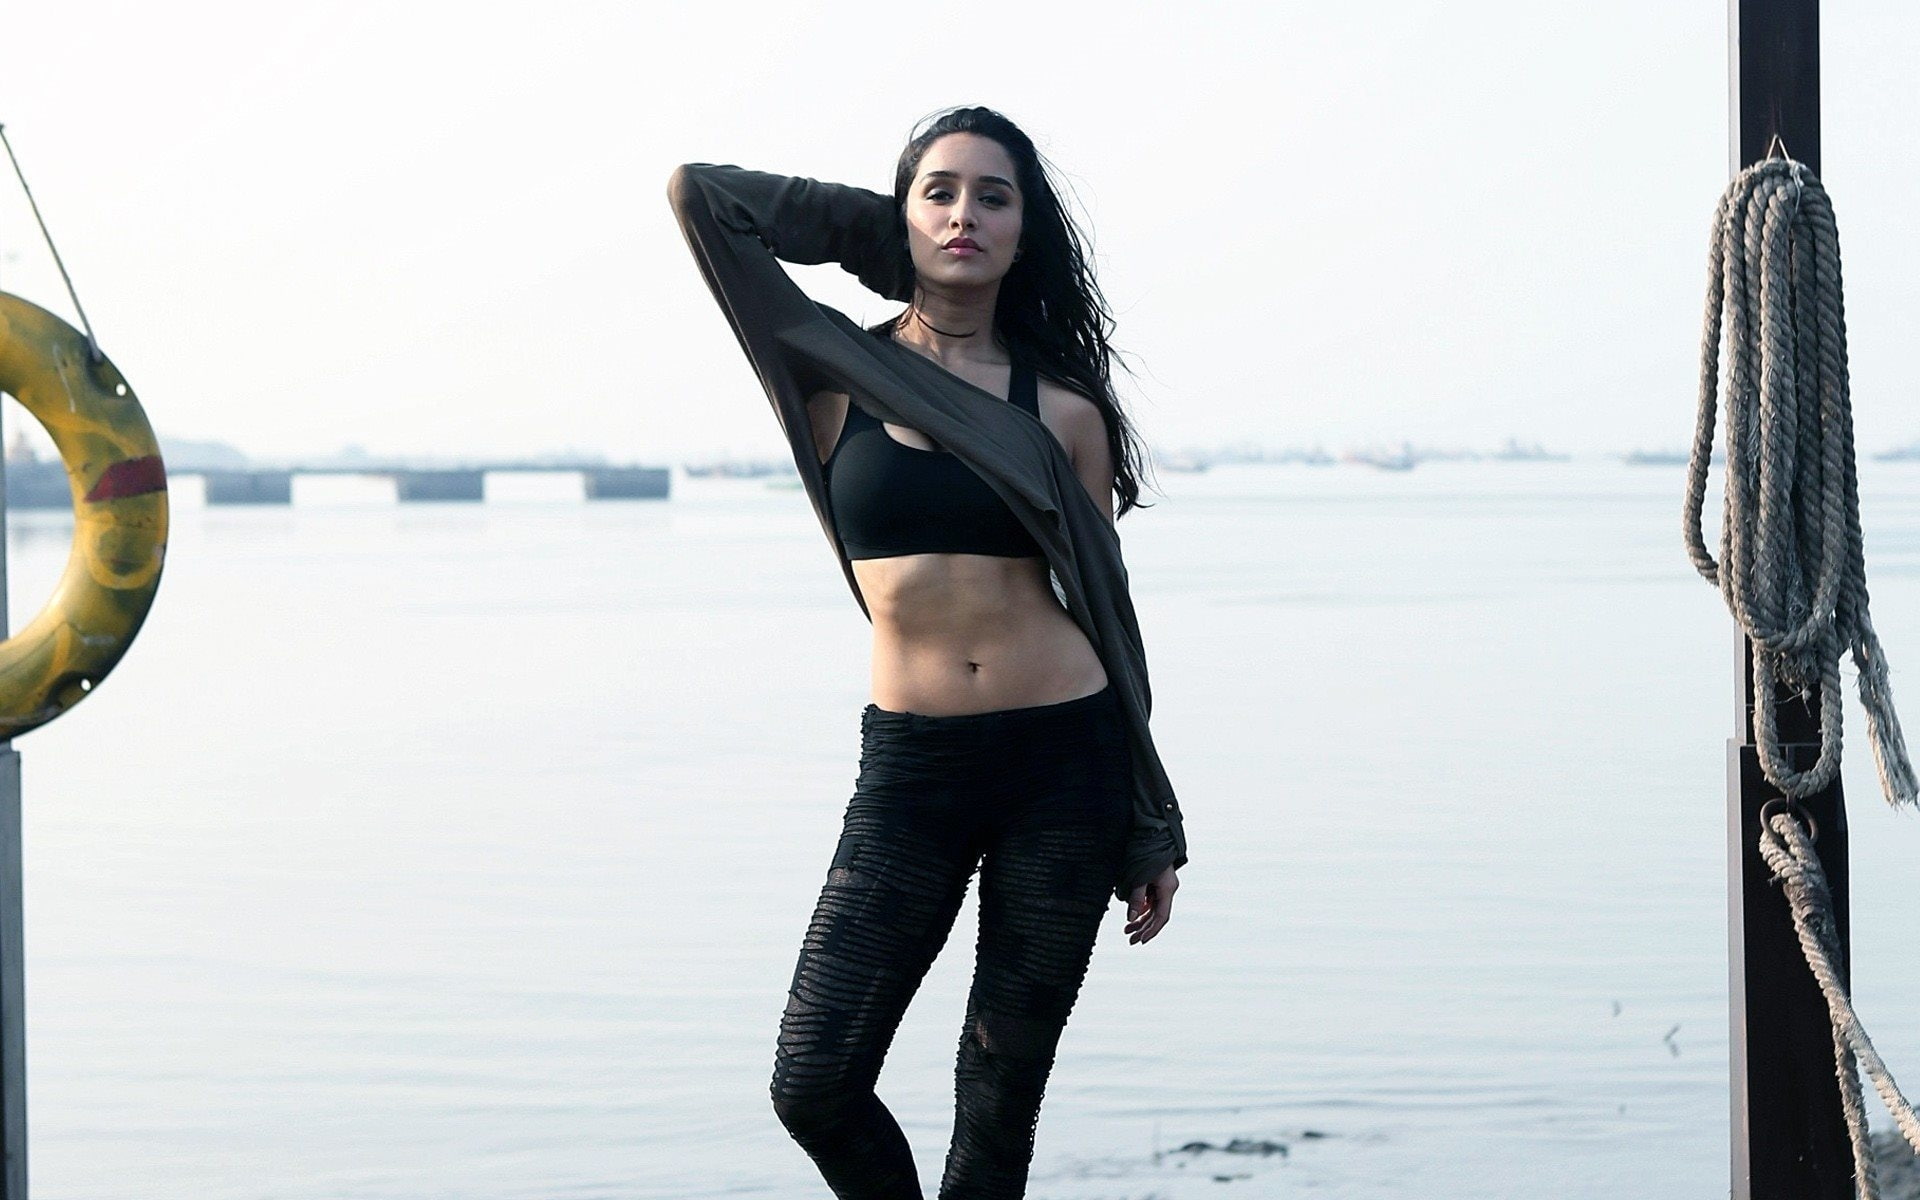 Hot Shraddha Kapoor In Black, one person, young adult, three quarter length